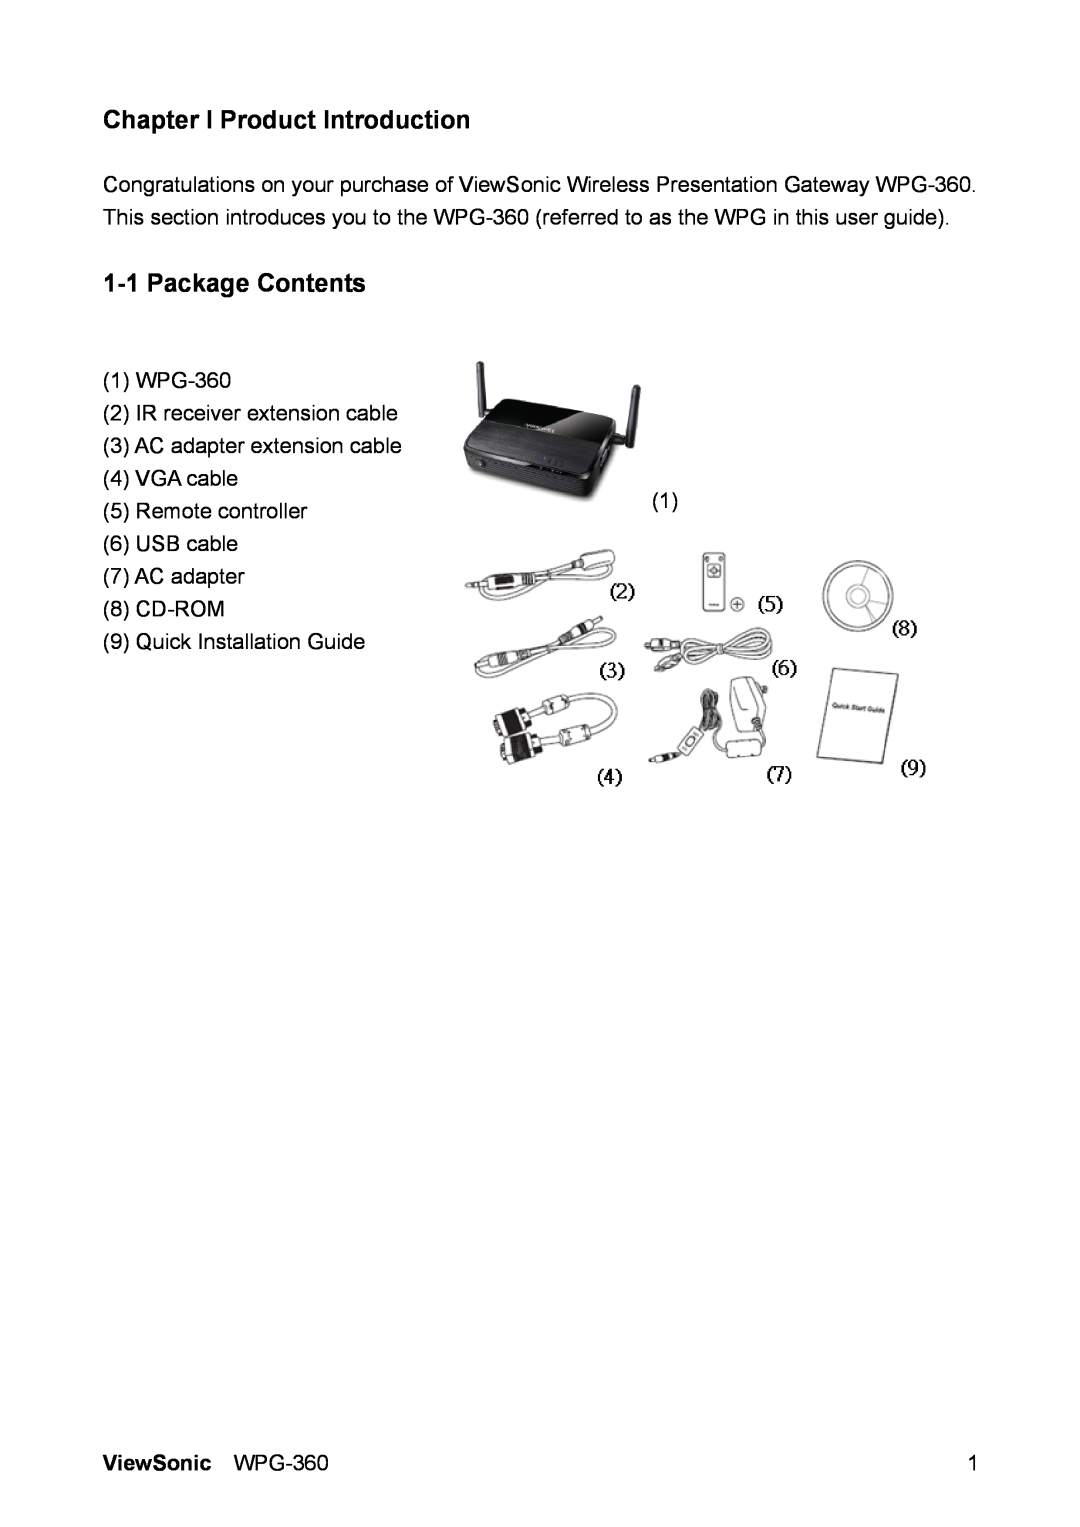 ViewSonic manual Chapter I Product Introduction, Package Contents, VGA cable, Remote controller, ViewSonic WPG-360 